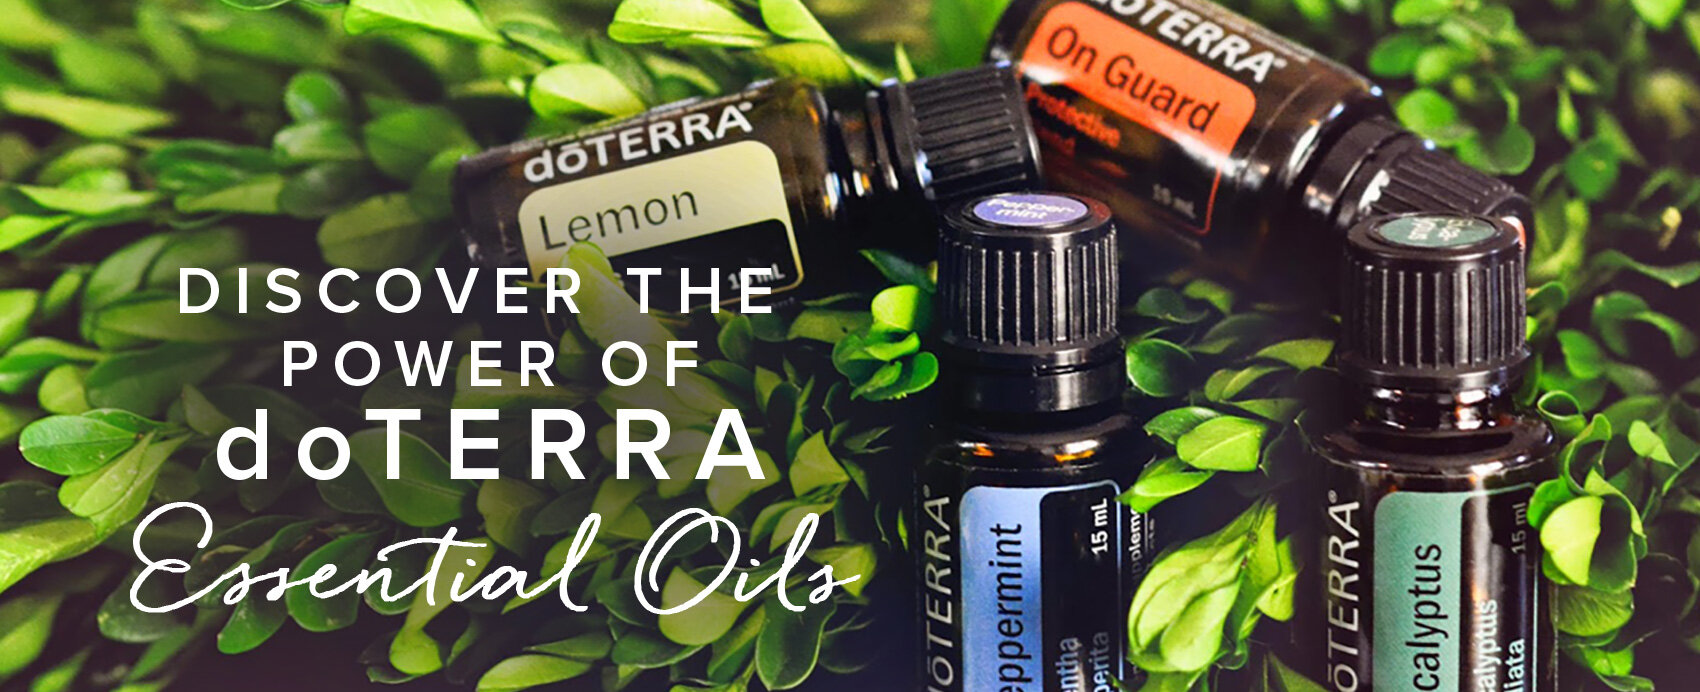 Sourcing Essential Oil Plants Where They Thrive Most, SourceToYou